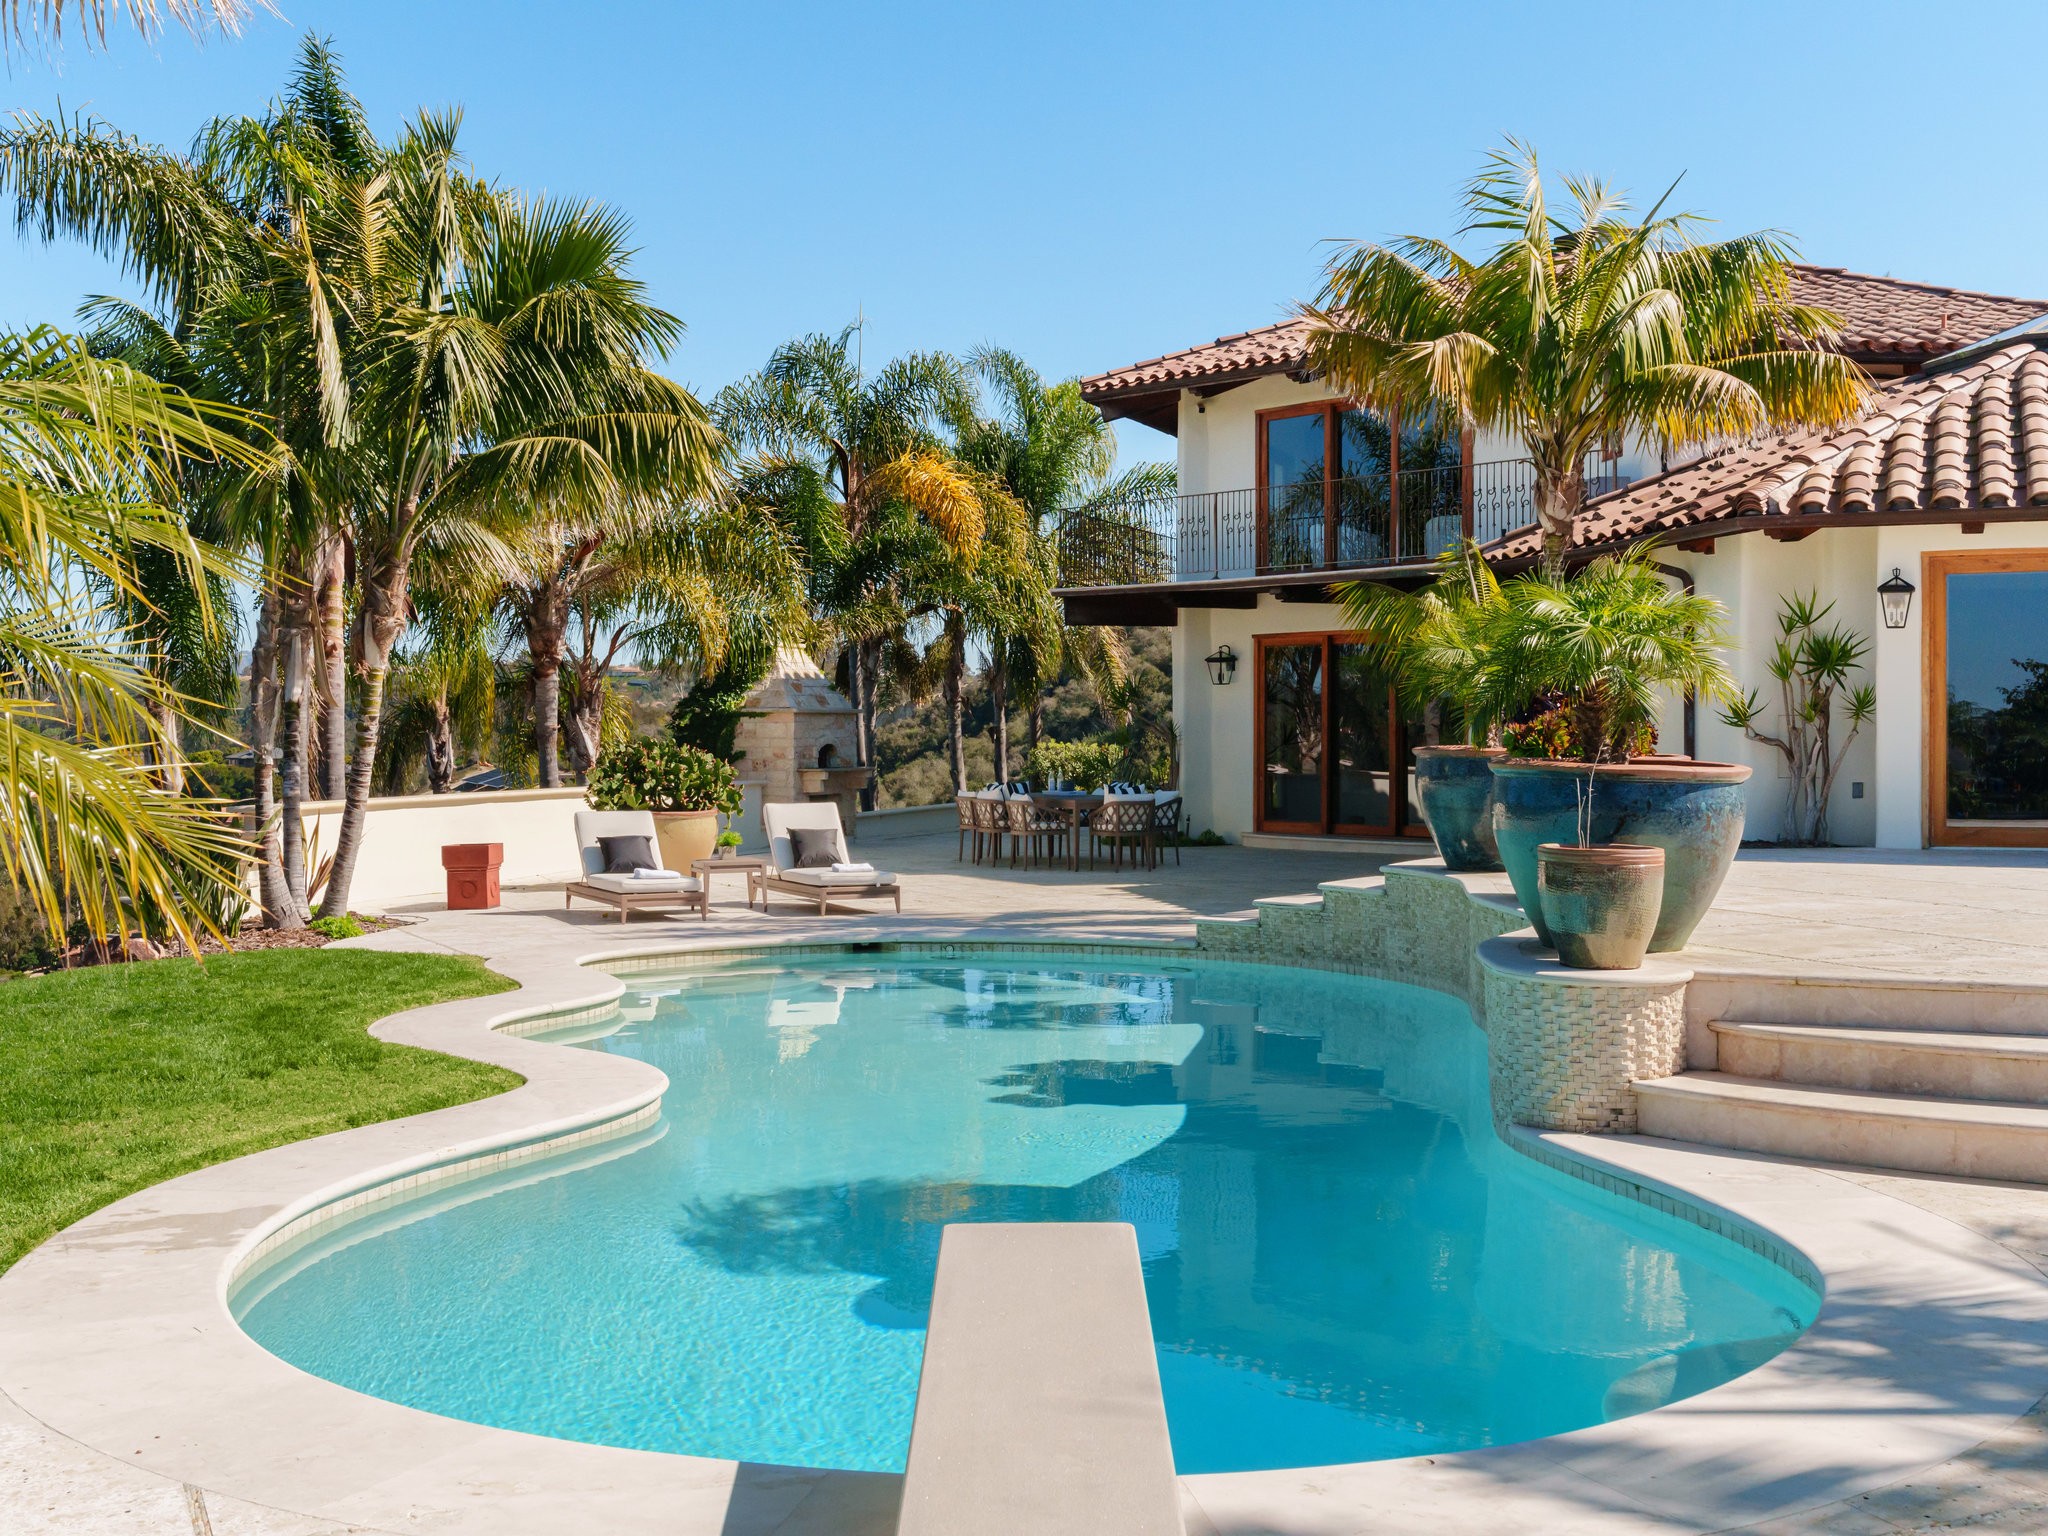 Coronado home's luxurious backyard pool area with sun-kissed patio and lounge chairs surrounded by lush palm trees.